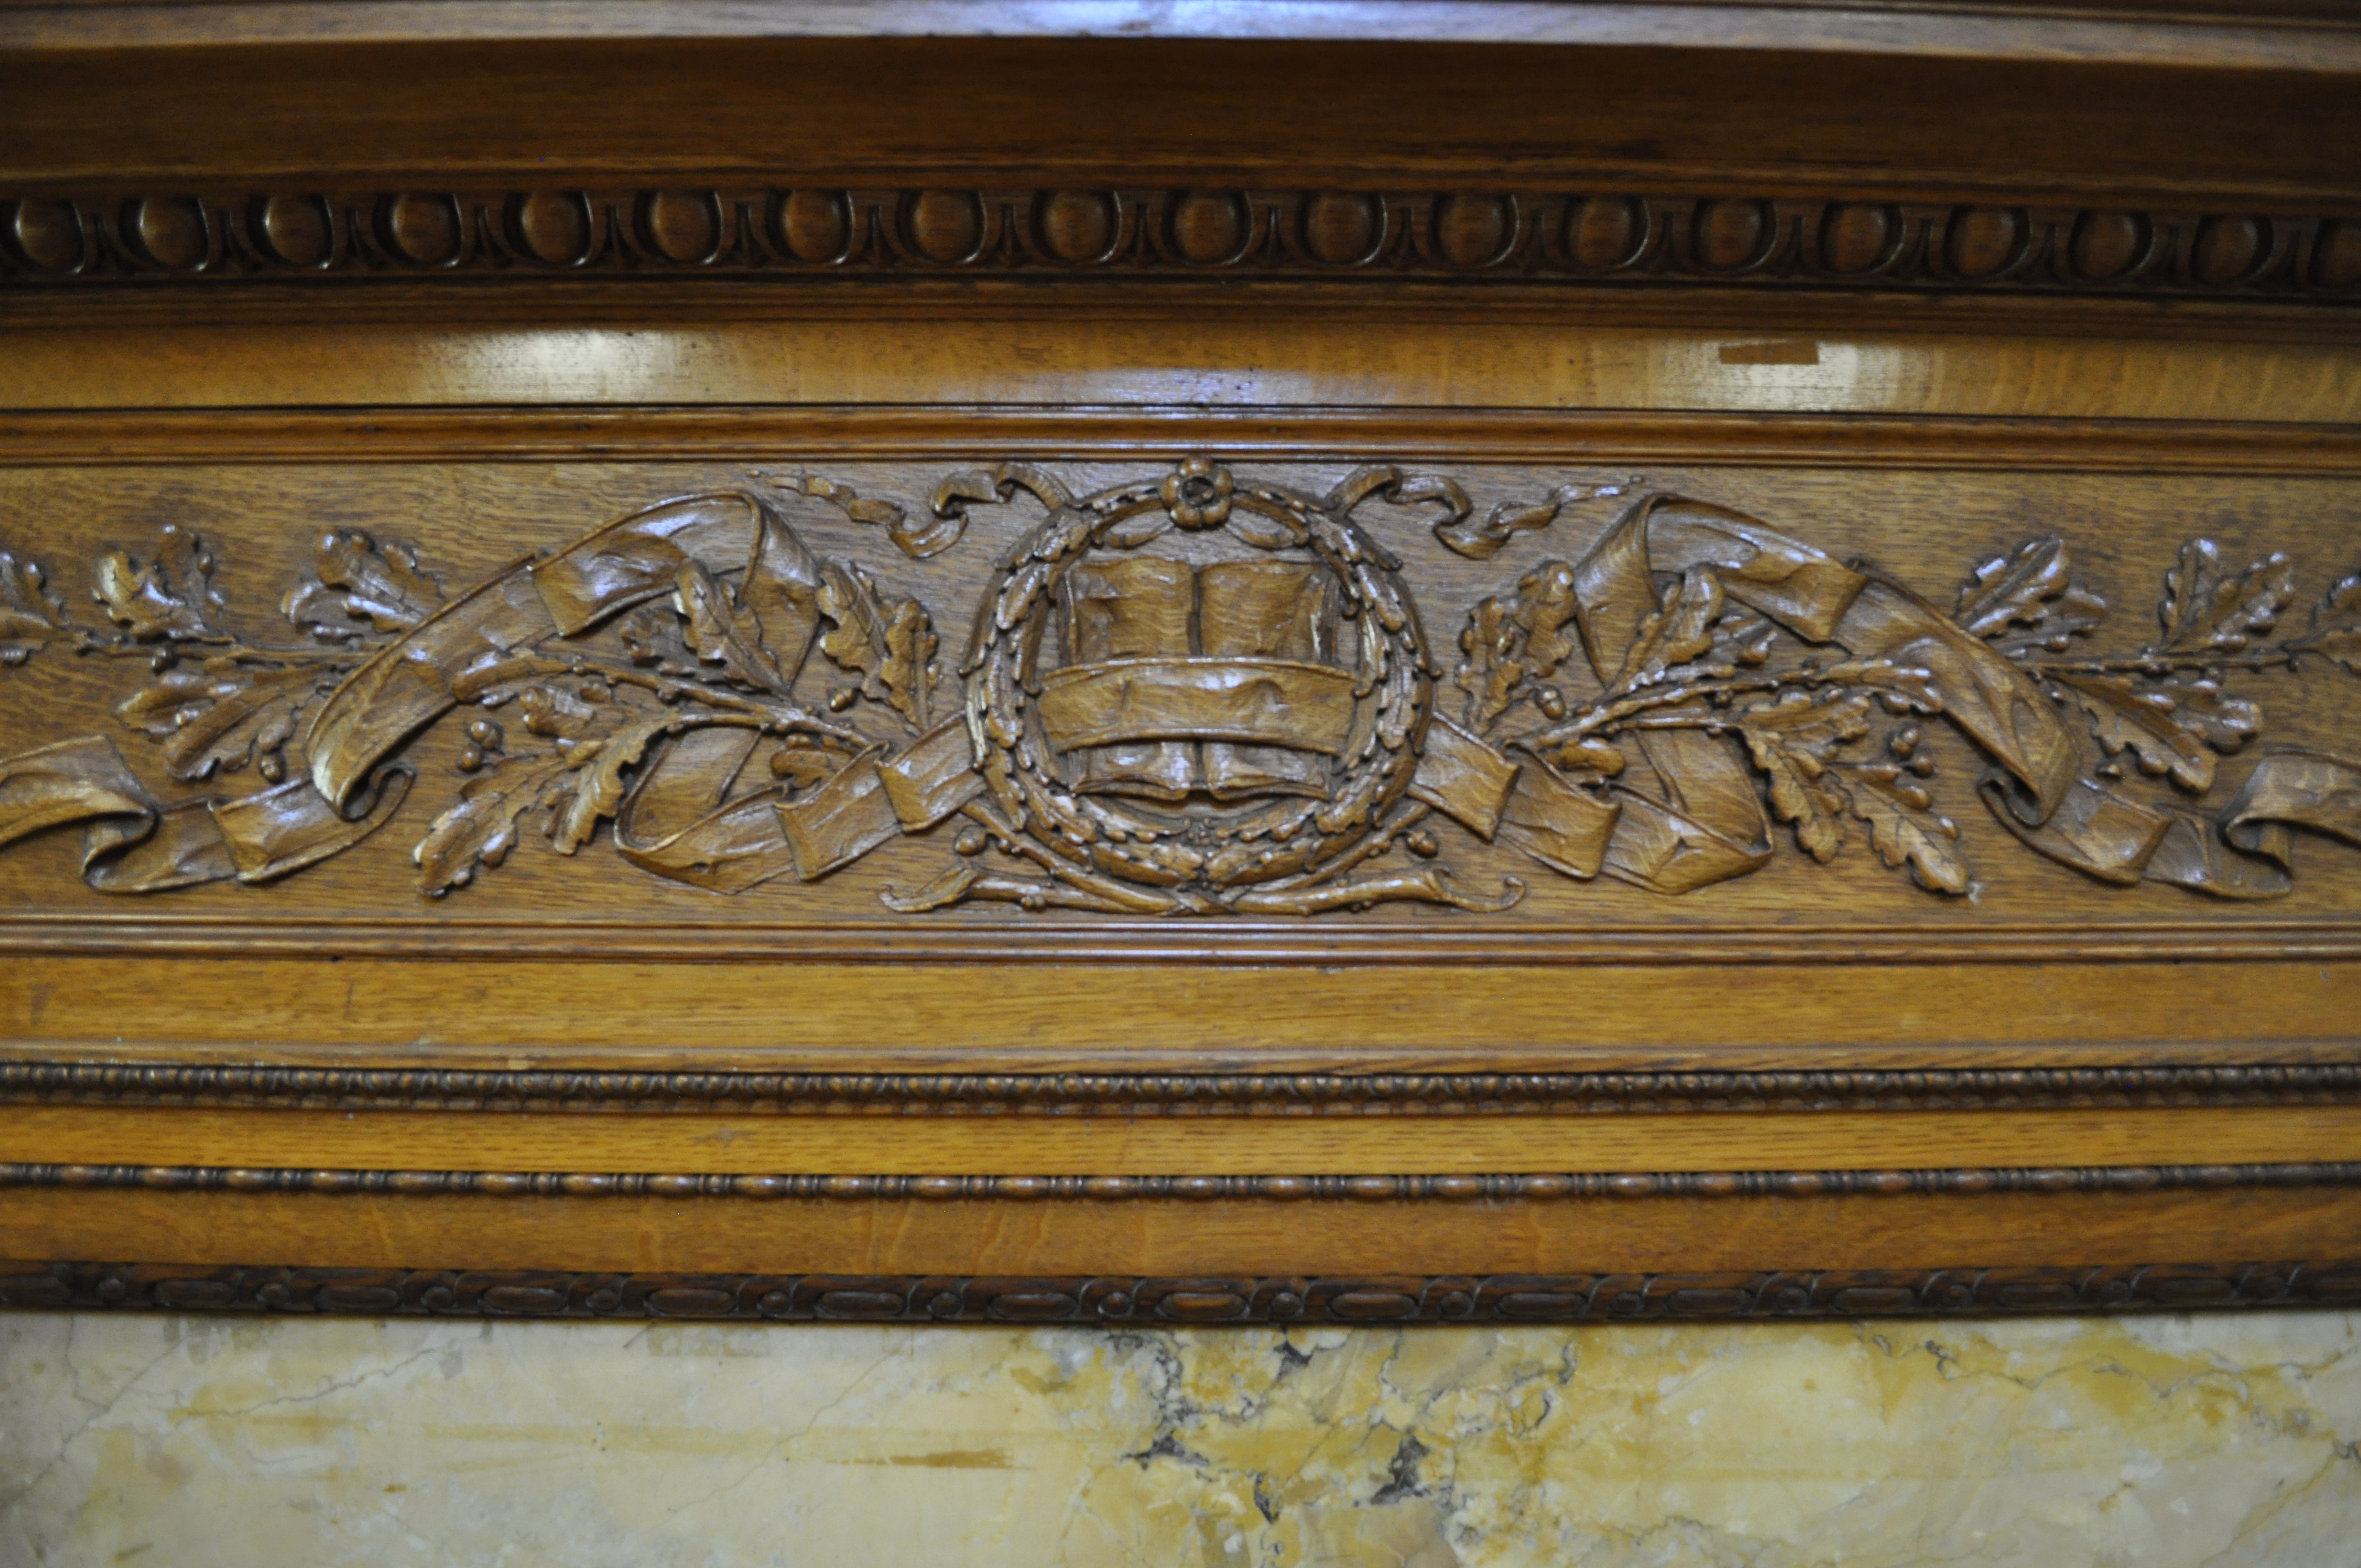 Detail of the decorative woodwork above the fireplace in the Teem Room, depicting an open book among oak leaves.